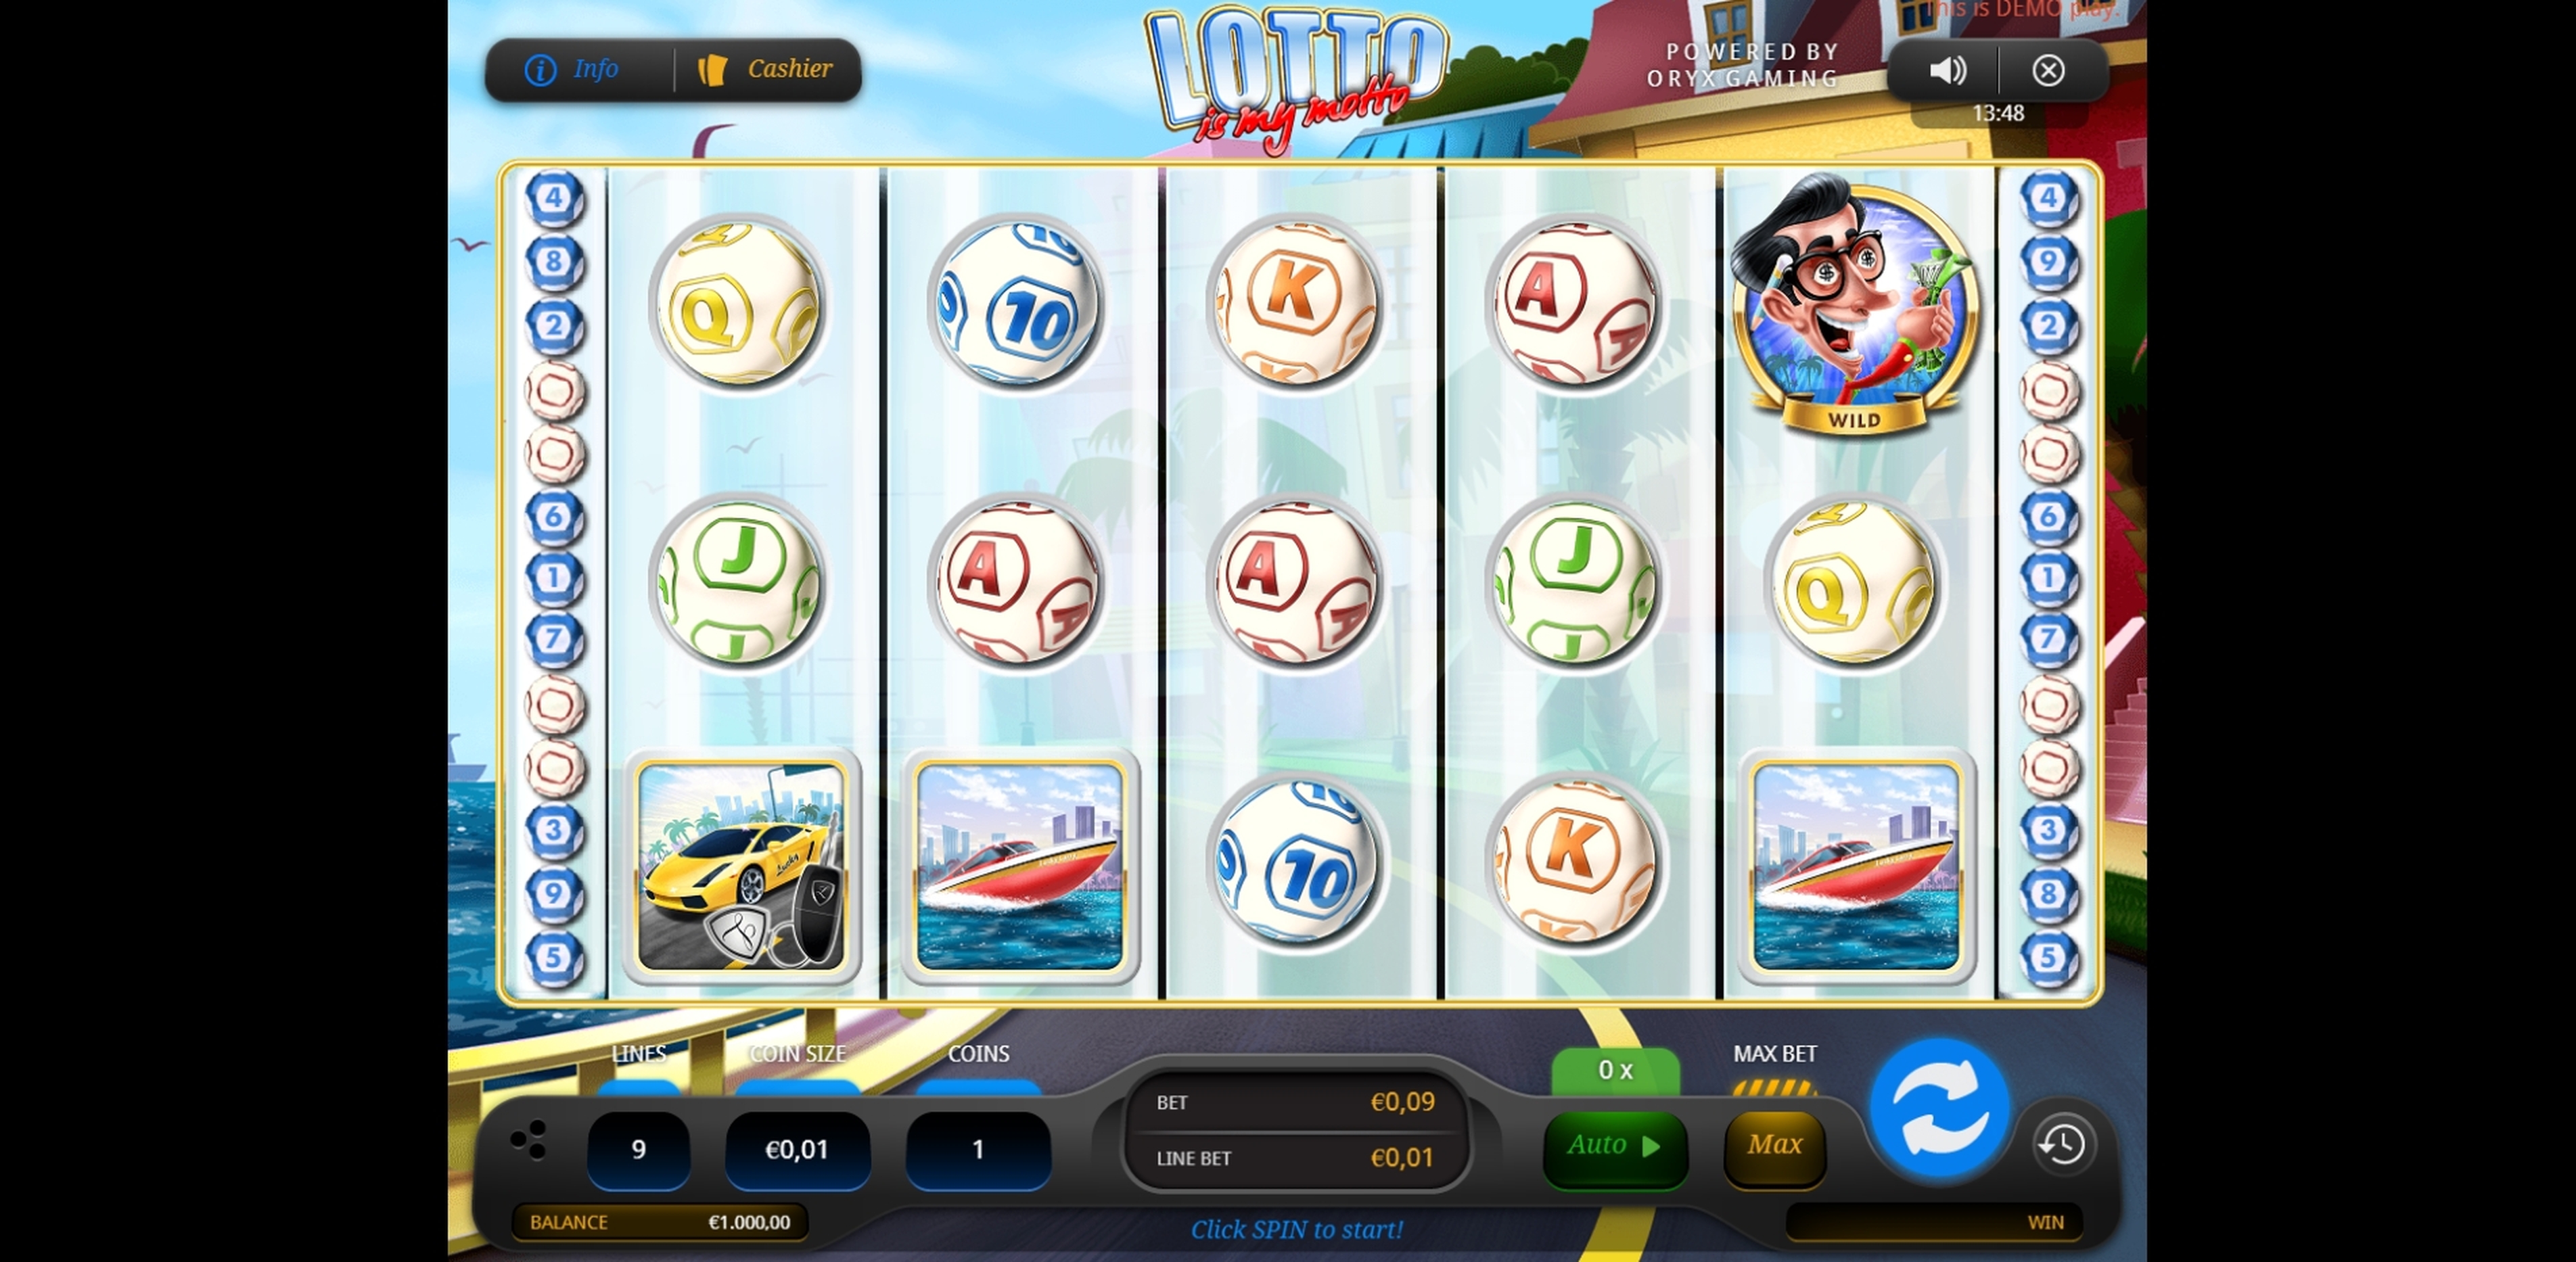 Reels in Lotto is My Motto Slot Game by Oryx Gaming